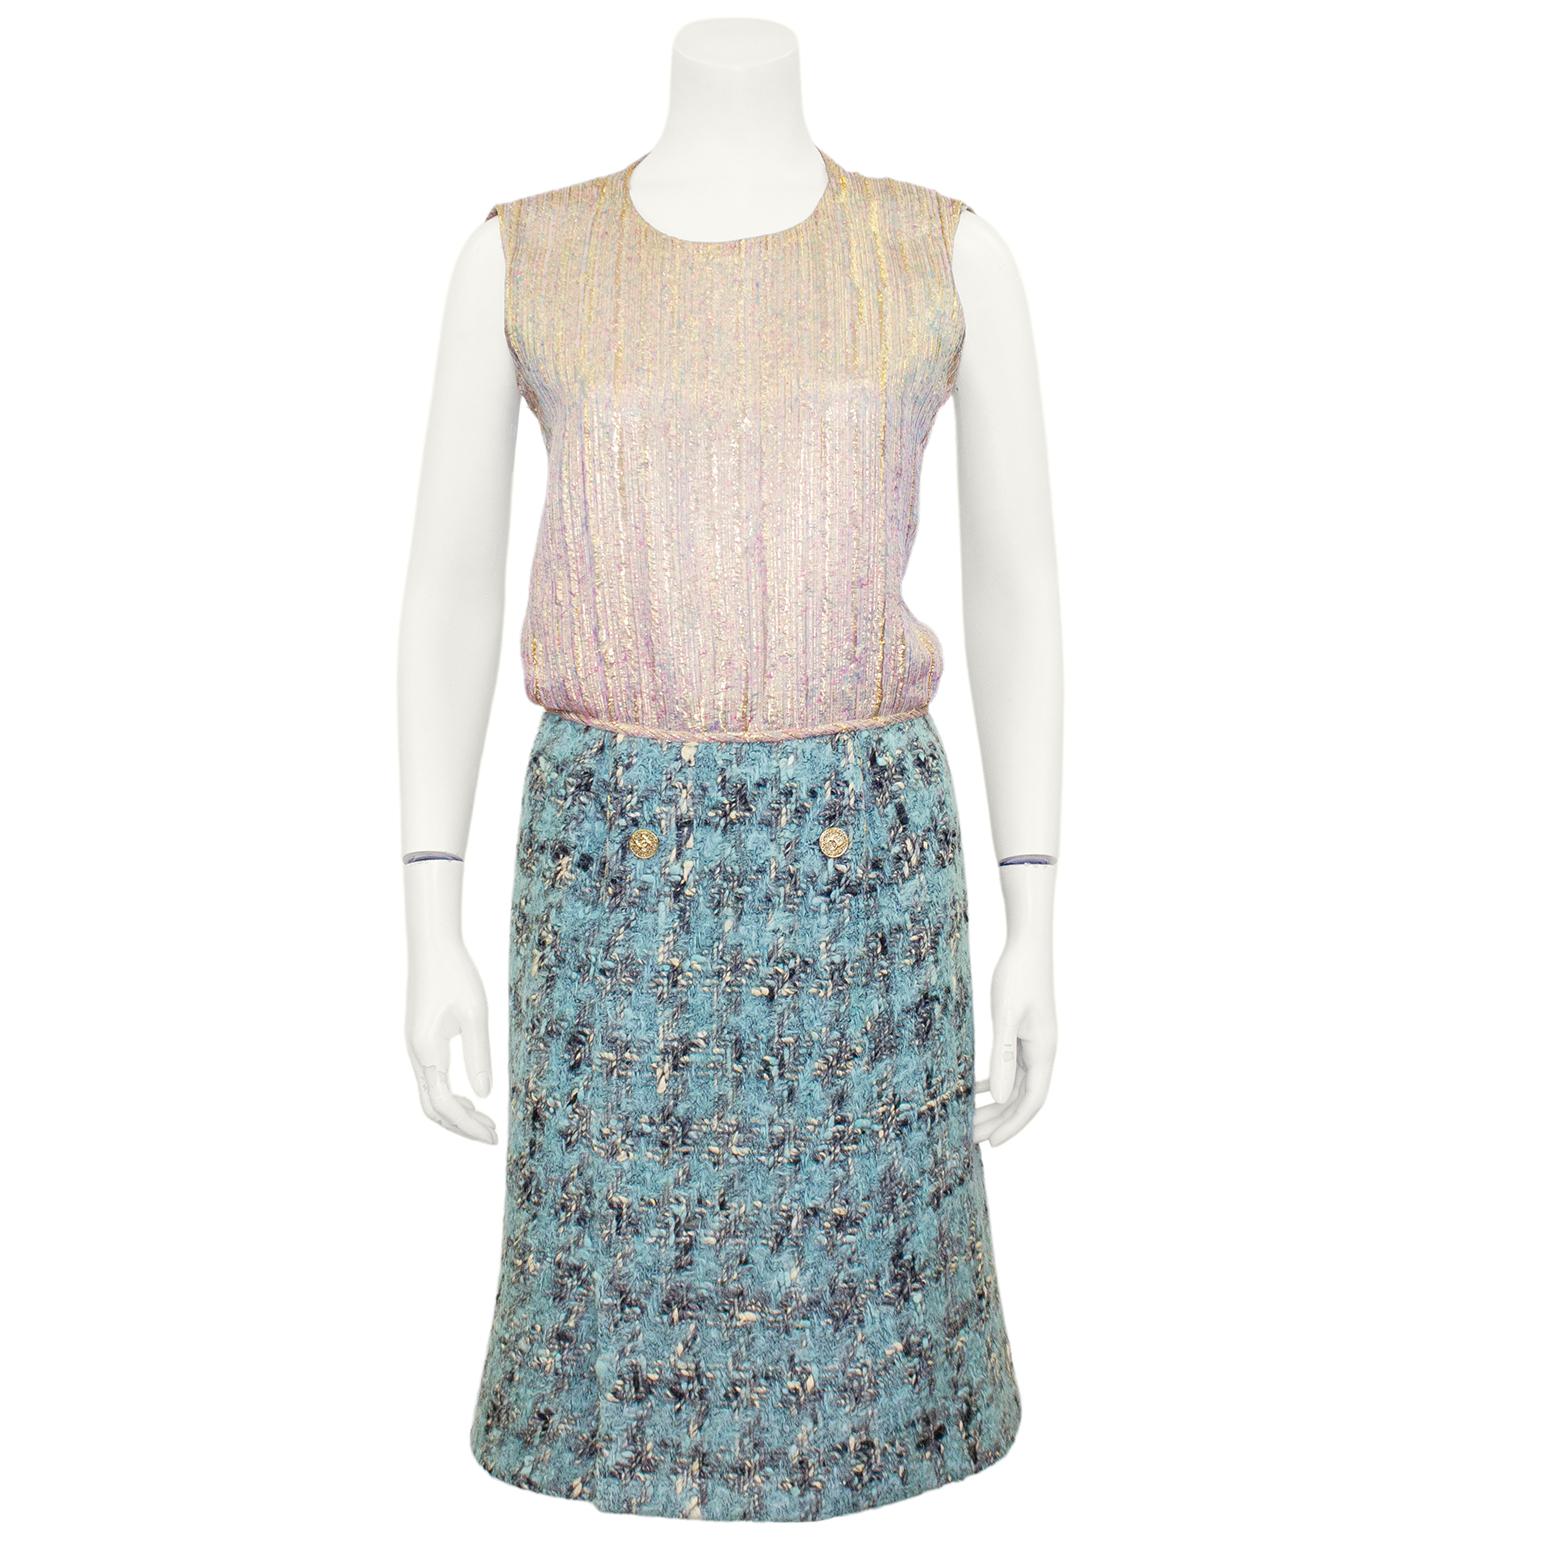 Women's 1960's Chanel Haute Couture Blue Tweed Jacket and Dress Ensemble 